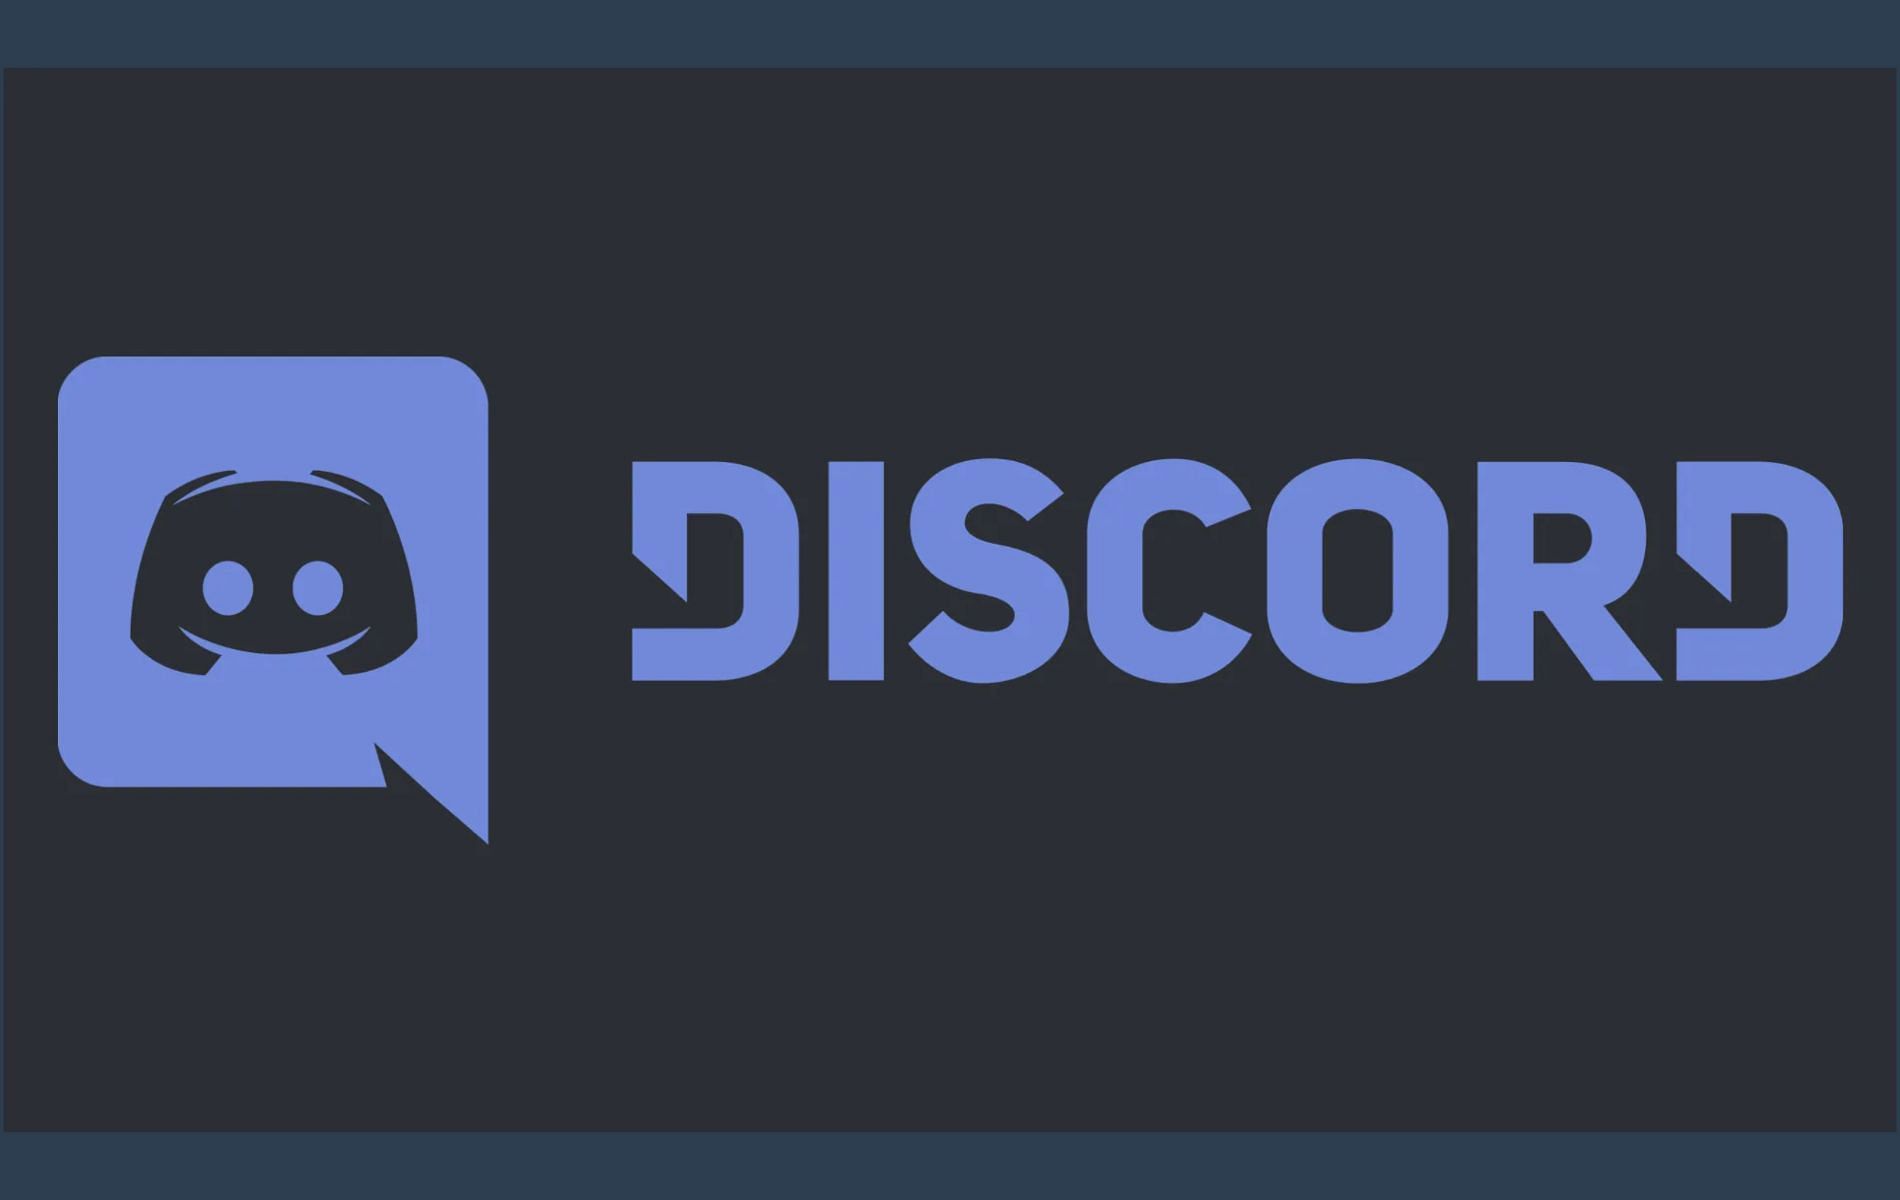 Enable Developer Mode through the desktop website, Android, or iOS app to get access to Discord IDs (Image via Discord)